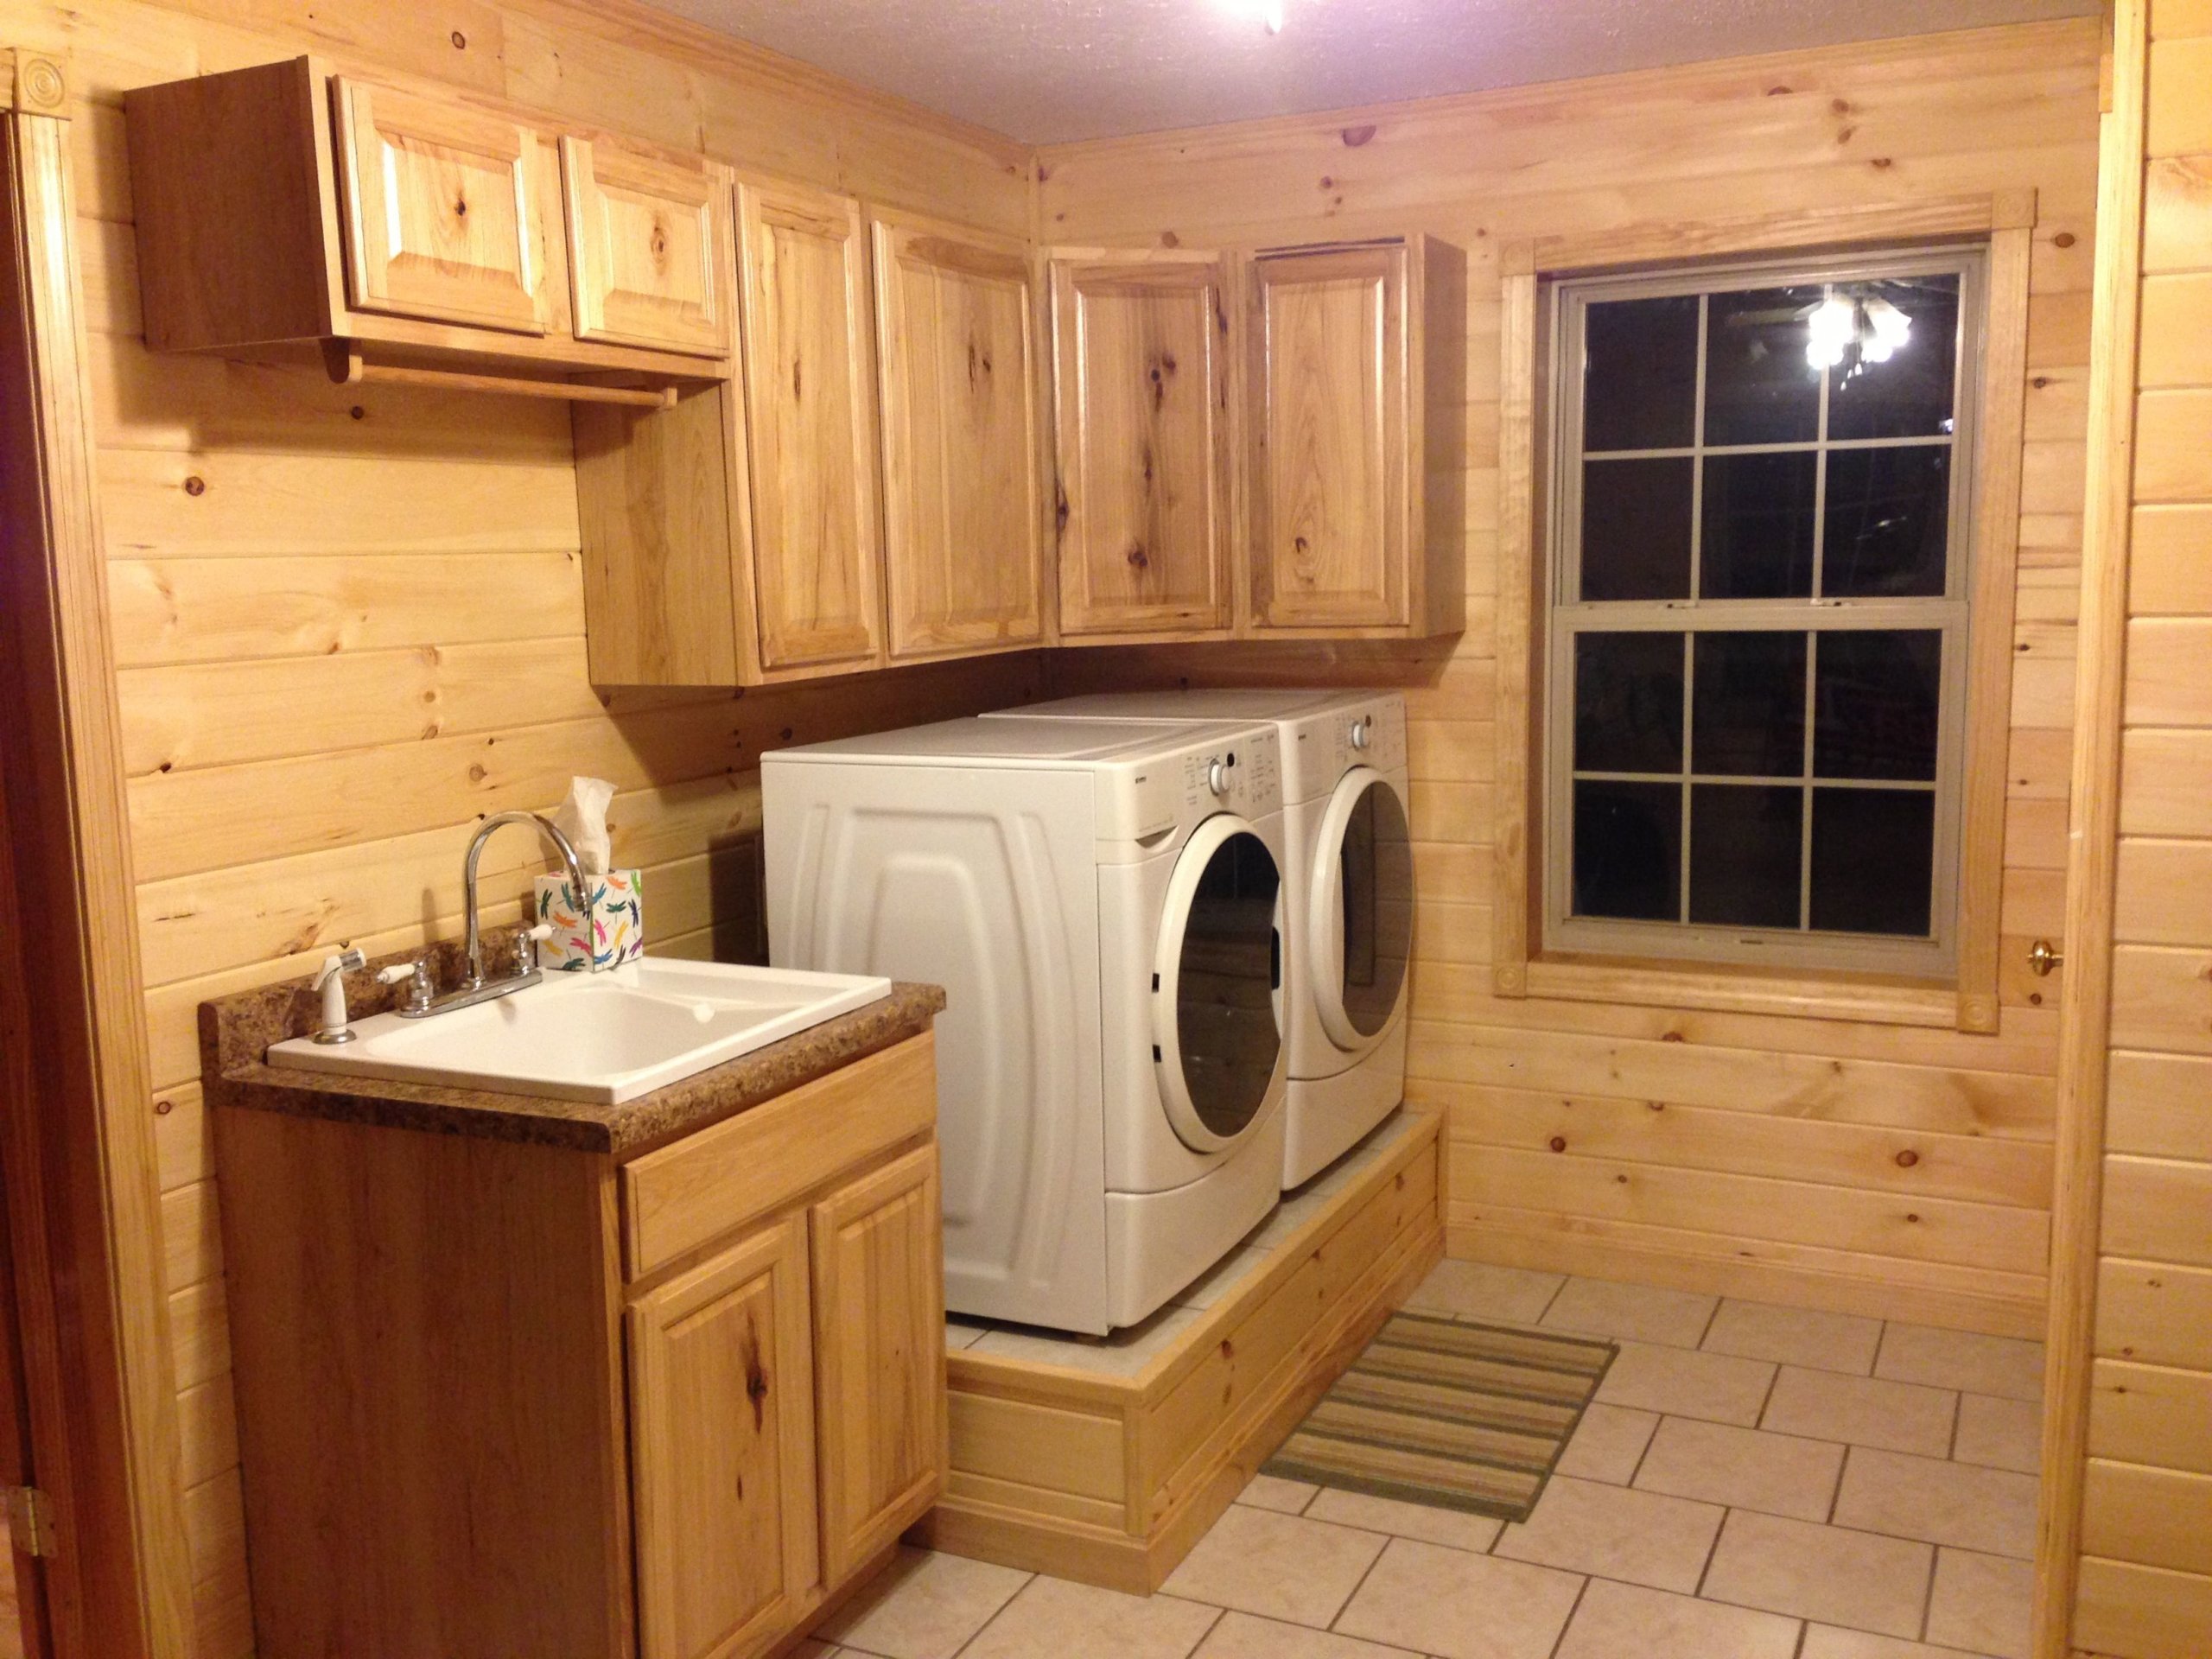 Washer and dryer on a platform beside sink